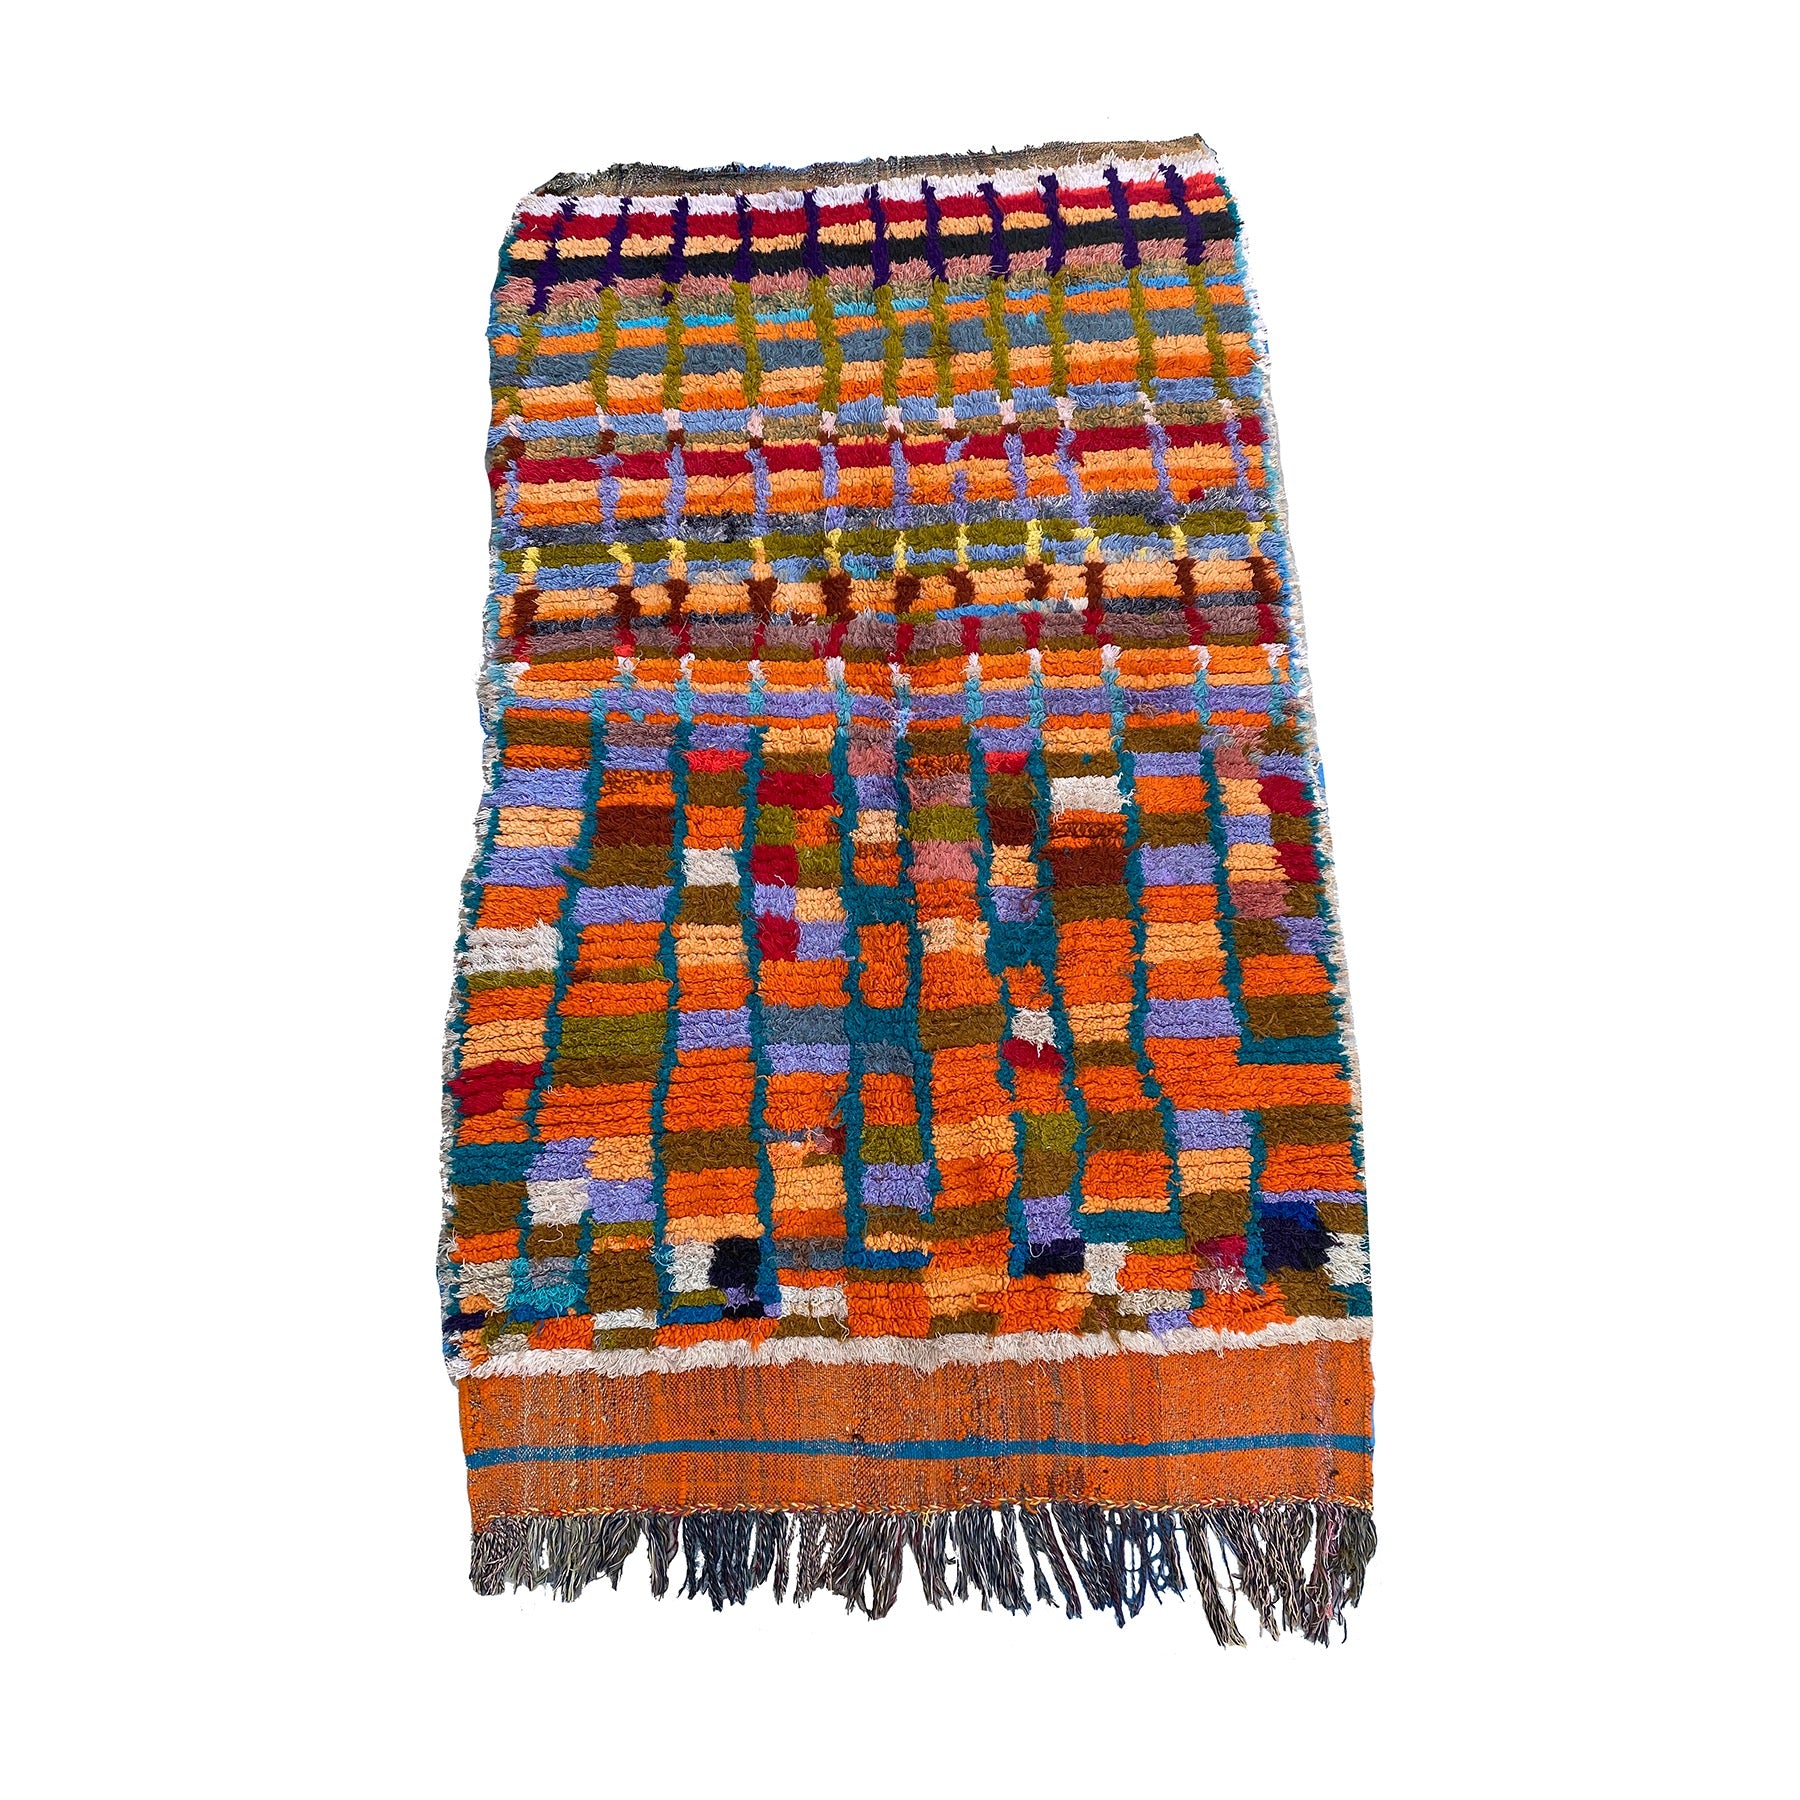 Colorful Moroccan Azilal rug in orange, teal, army green, and yellow - Kantara | Moroccan Rugs